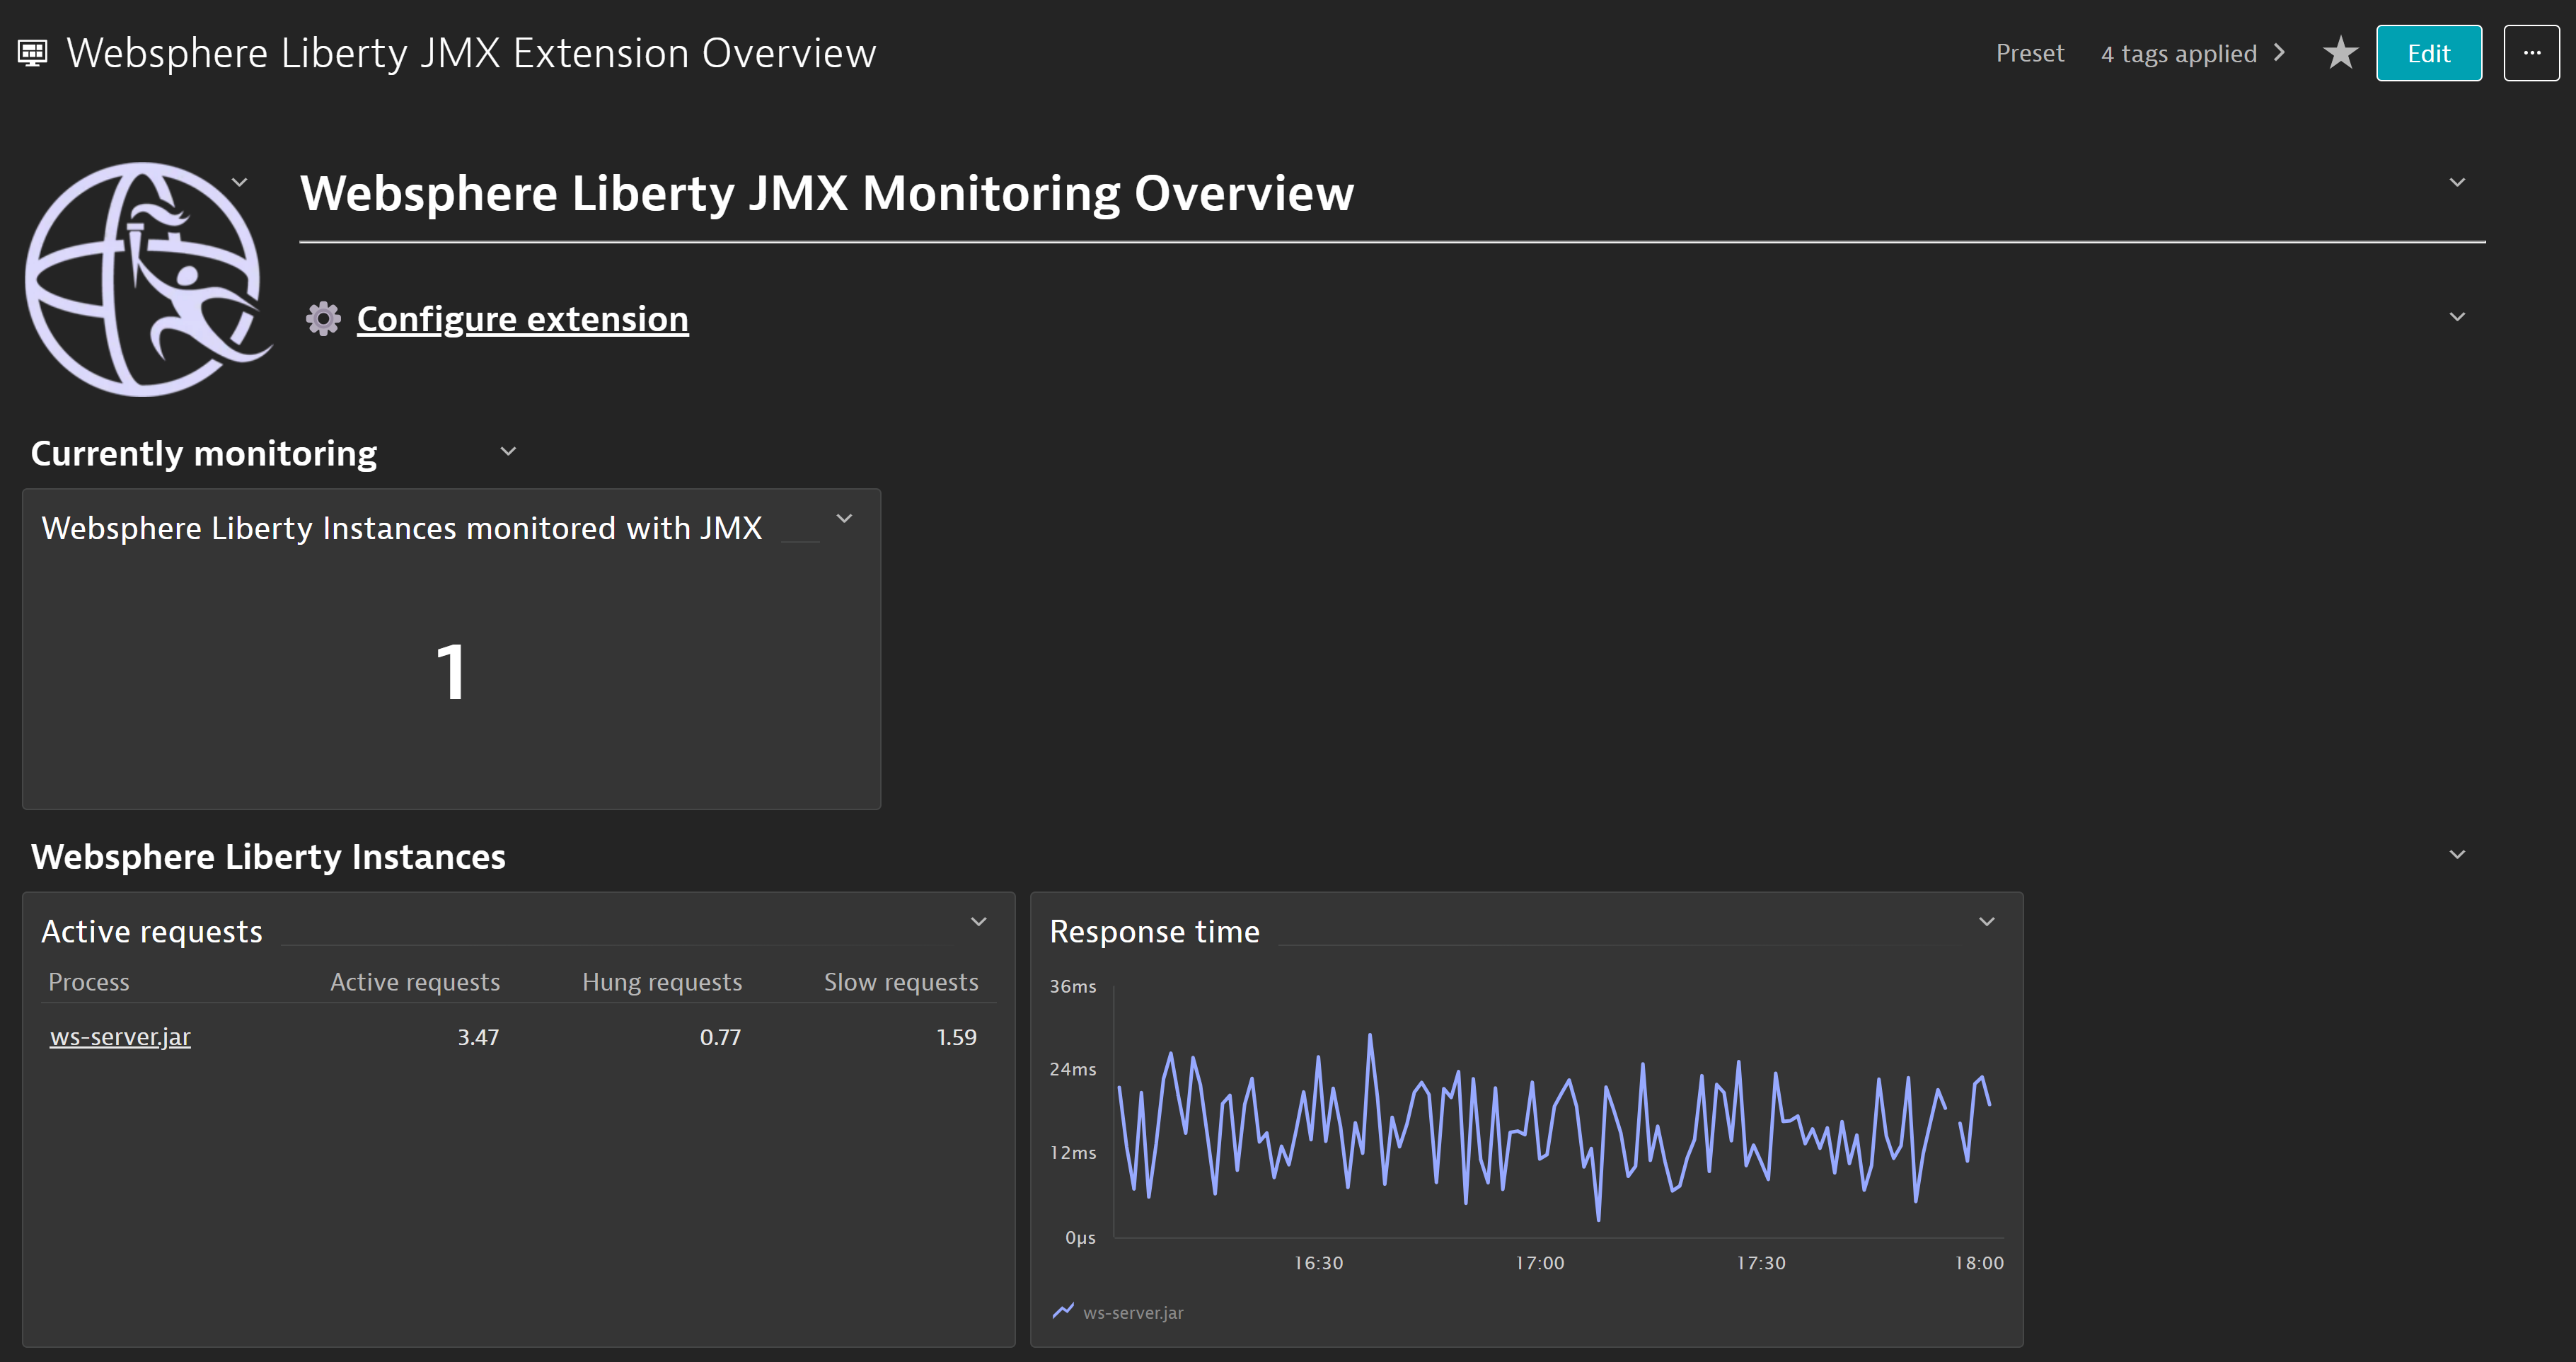 Get a quick look at your WebSphere Liberty processes monitored with JMX and the metrics this integration brings.